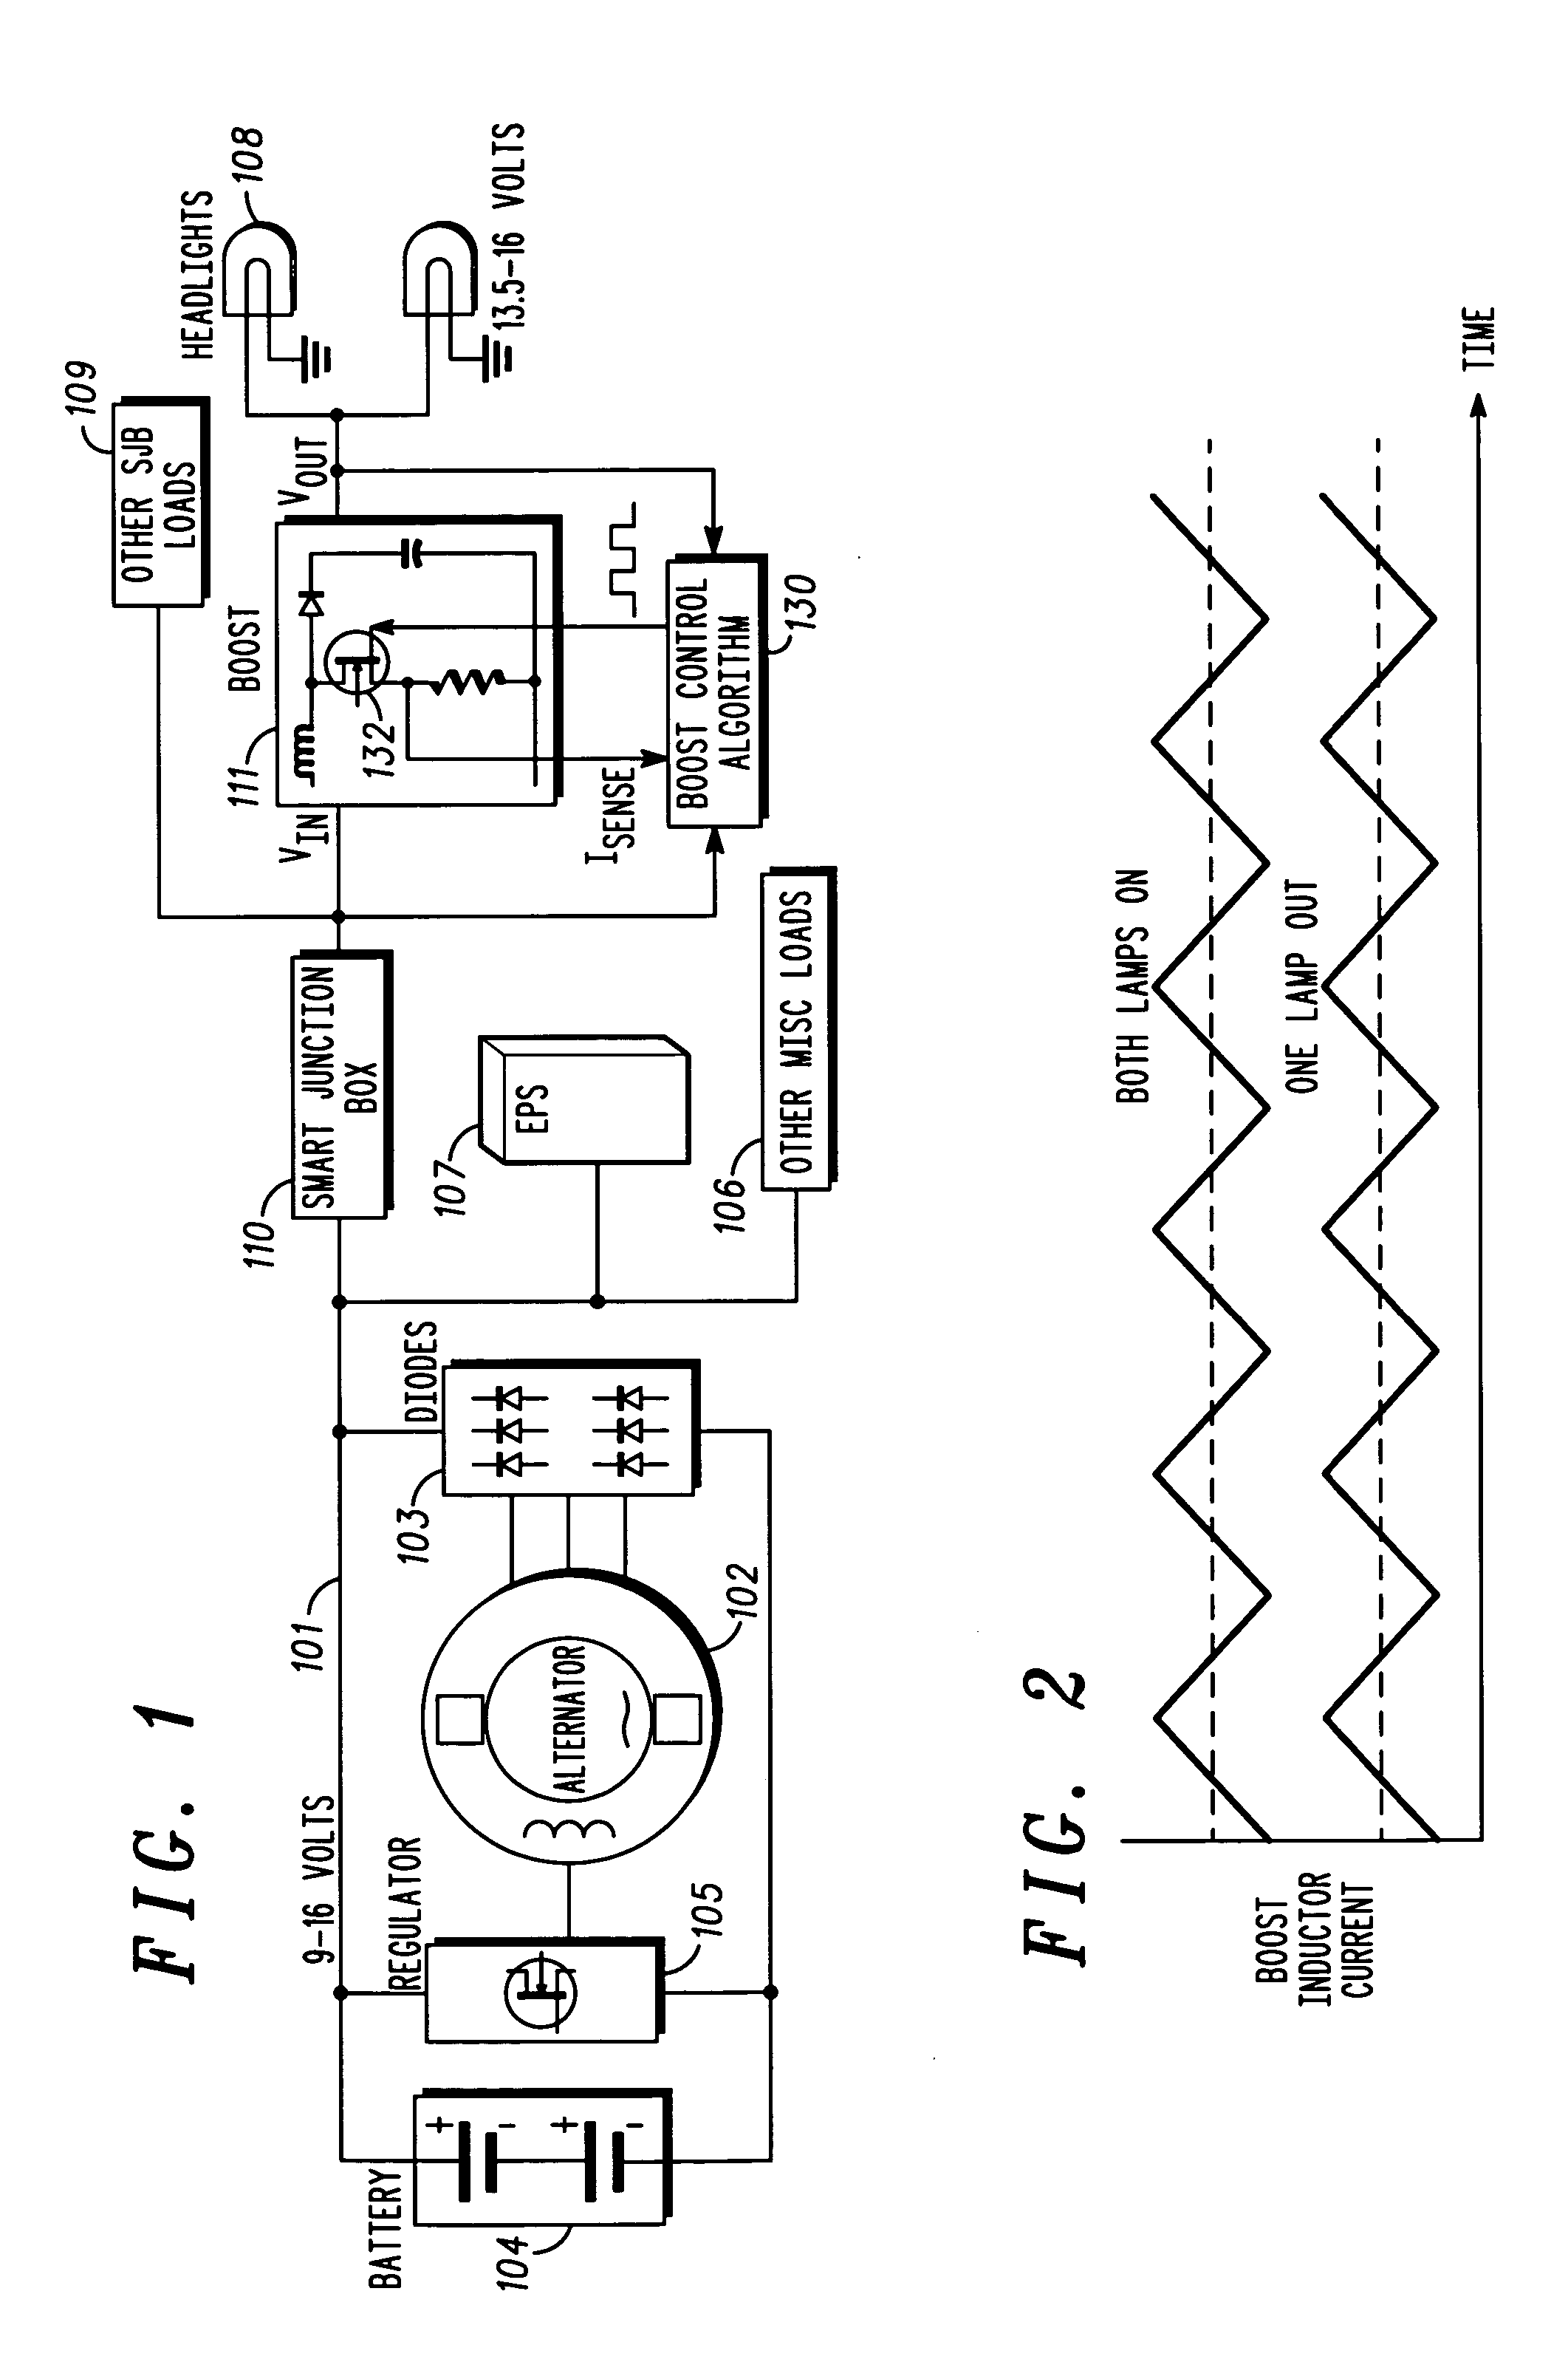 Automotive electrical system configuration using a two bus structure